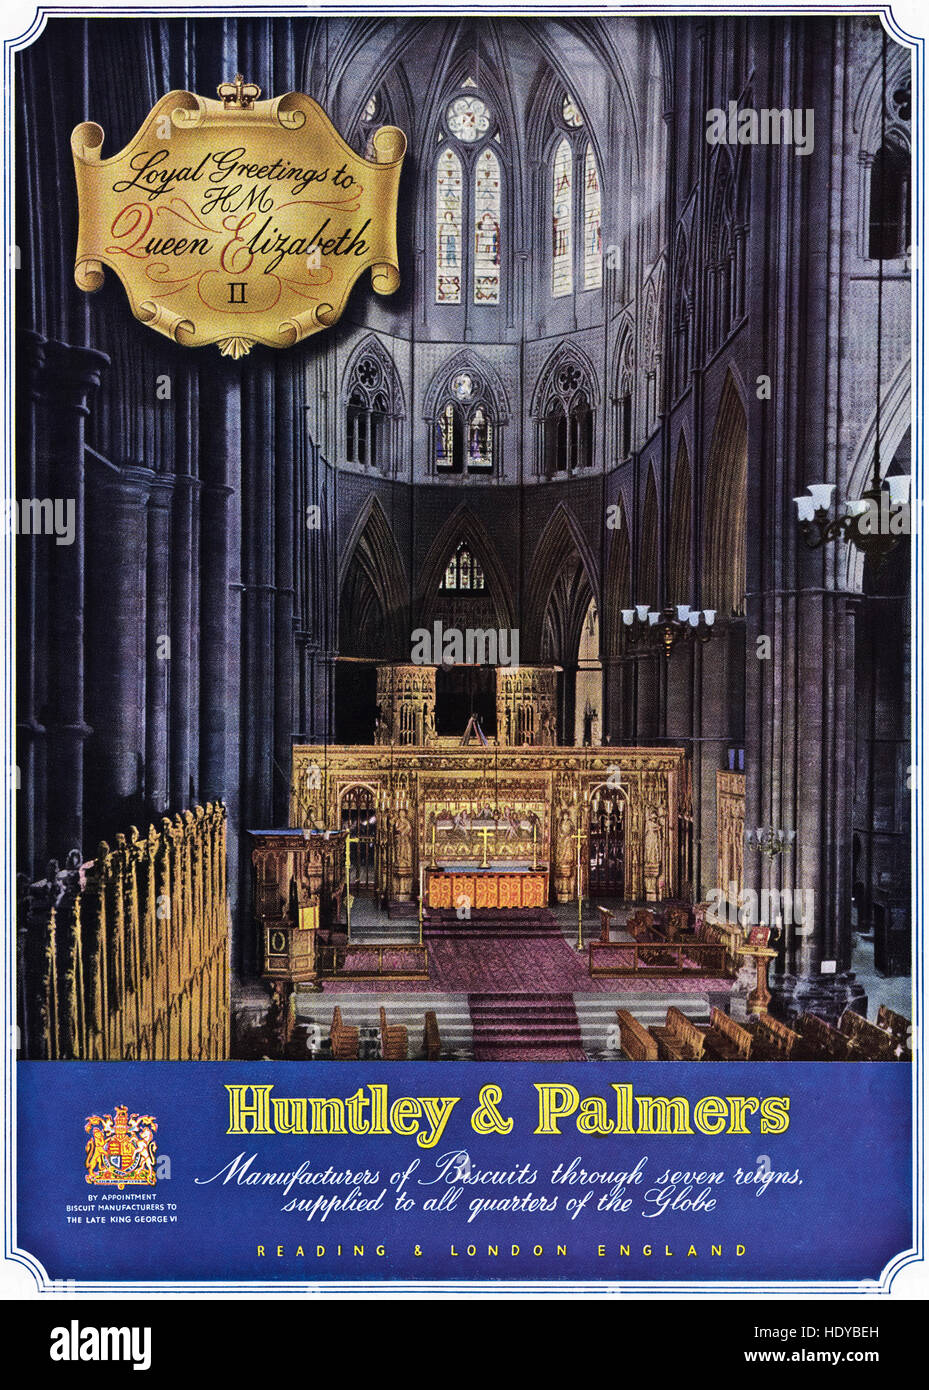 1950s advert advertising from original 50s old vintage English magazine dated 1953 advertisement for Huntley & Palmers Biscuits celebrating the coronation of Queen Elizabeth II Stock Photo